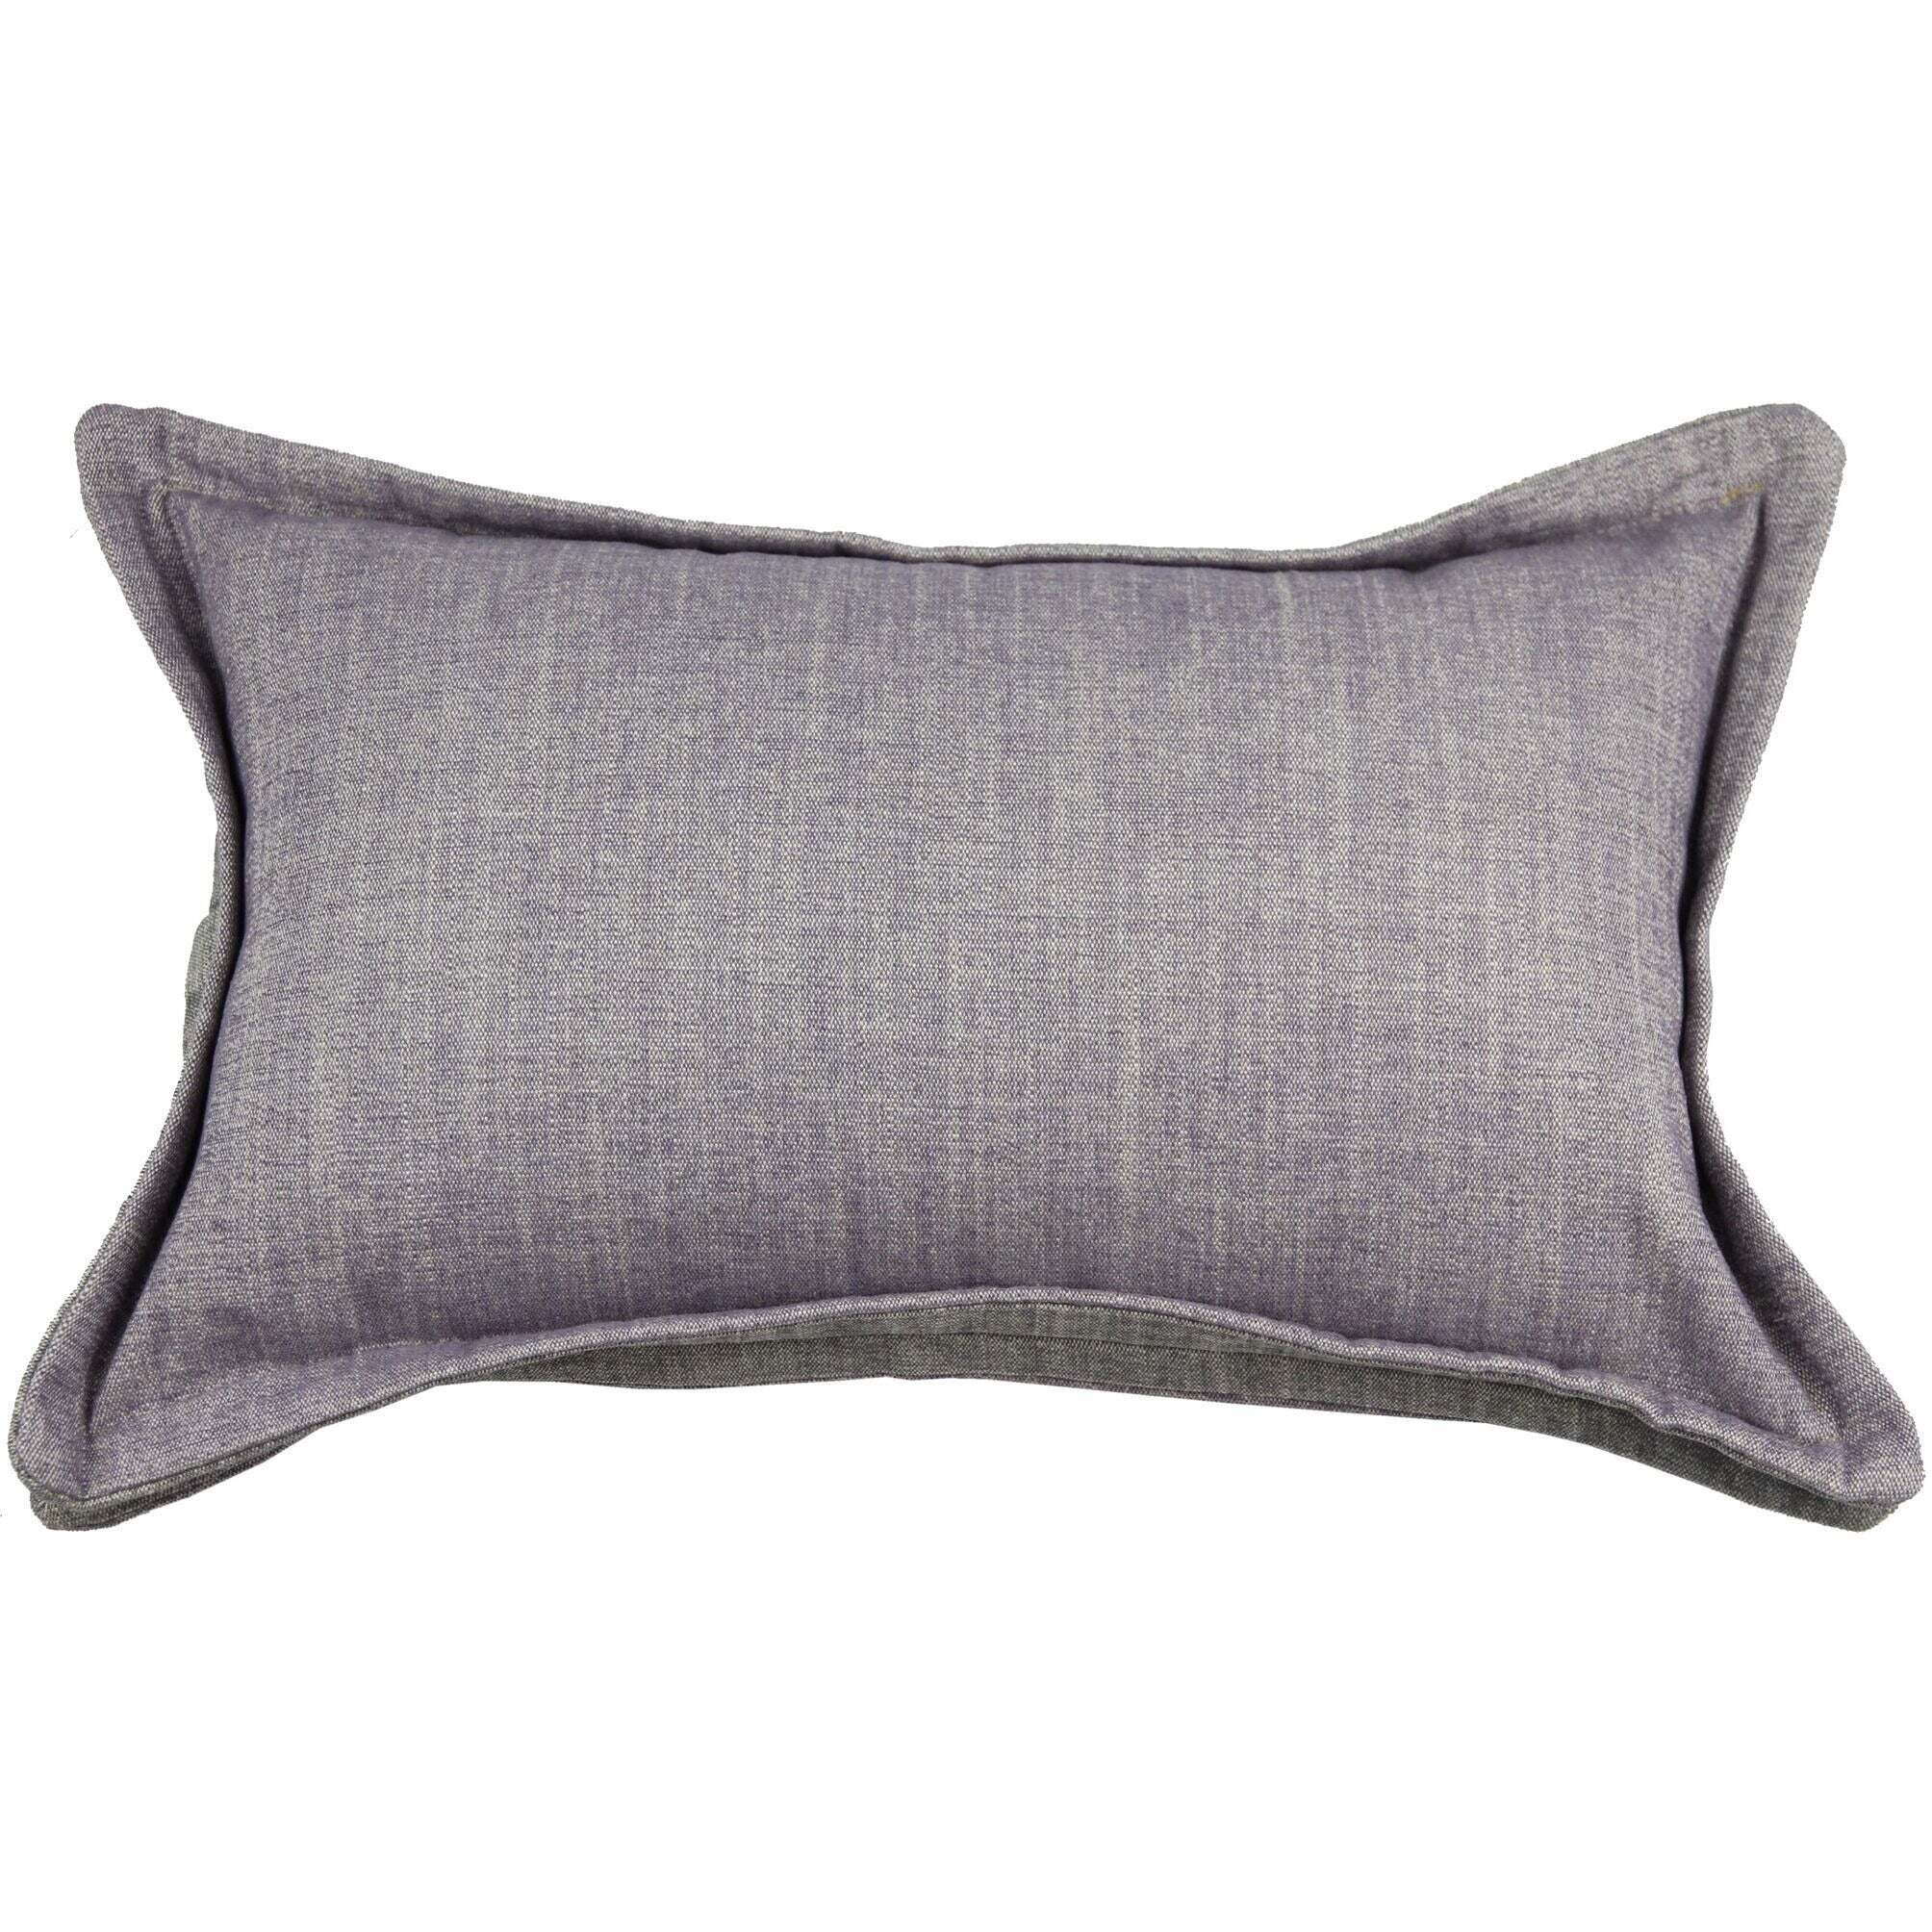 Rhumba Accent Lilac Purple + Grey Pillow, Cover Only / 60cm x 40cm